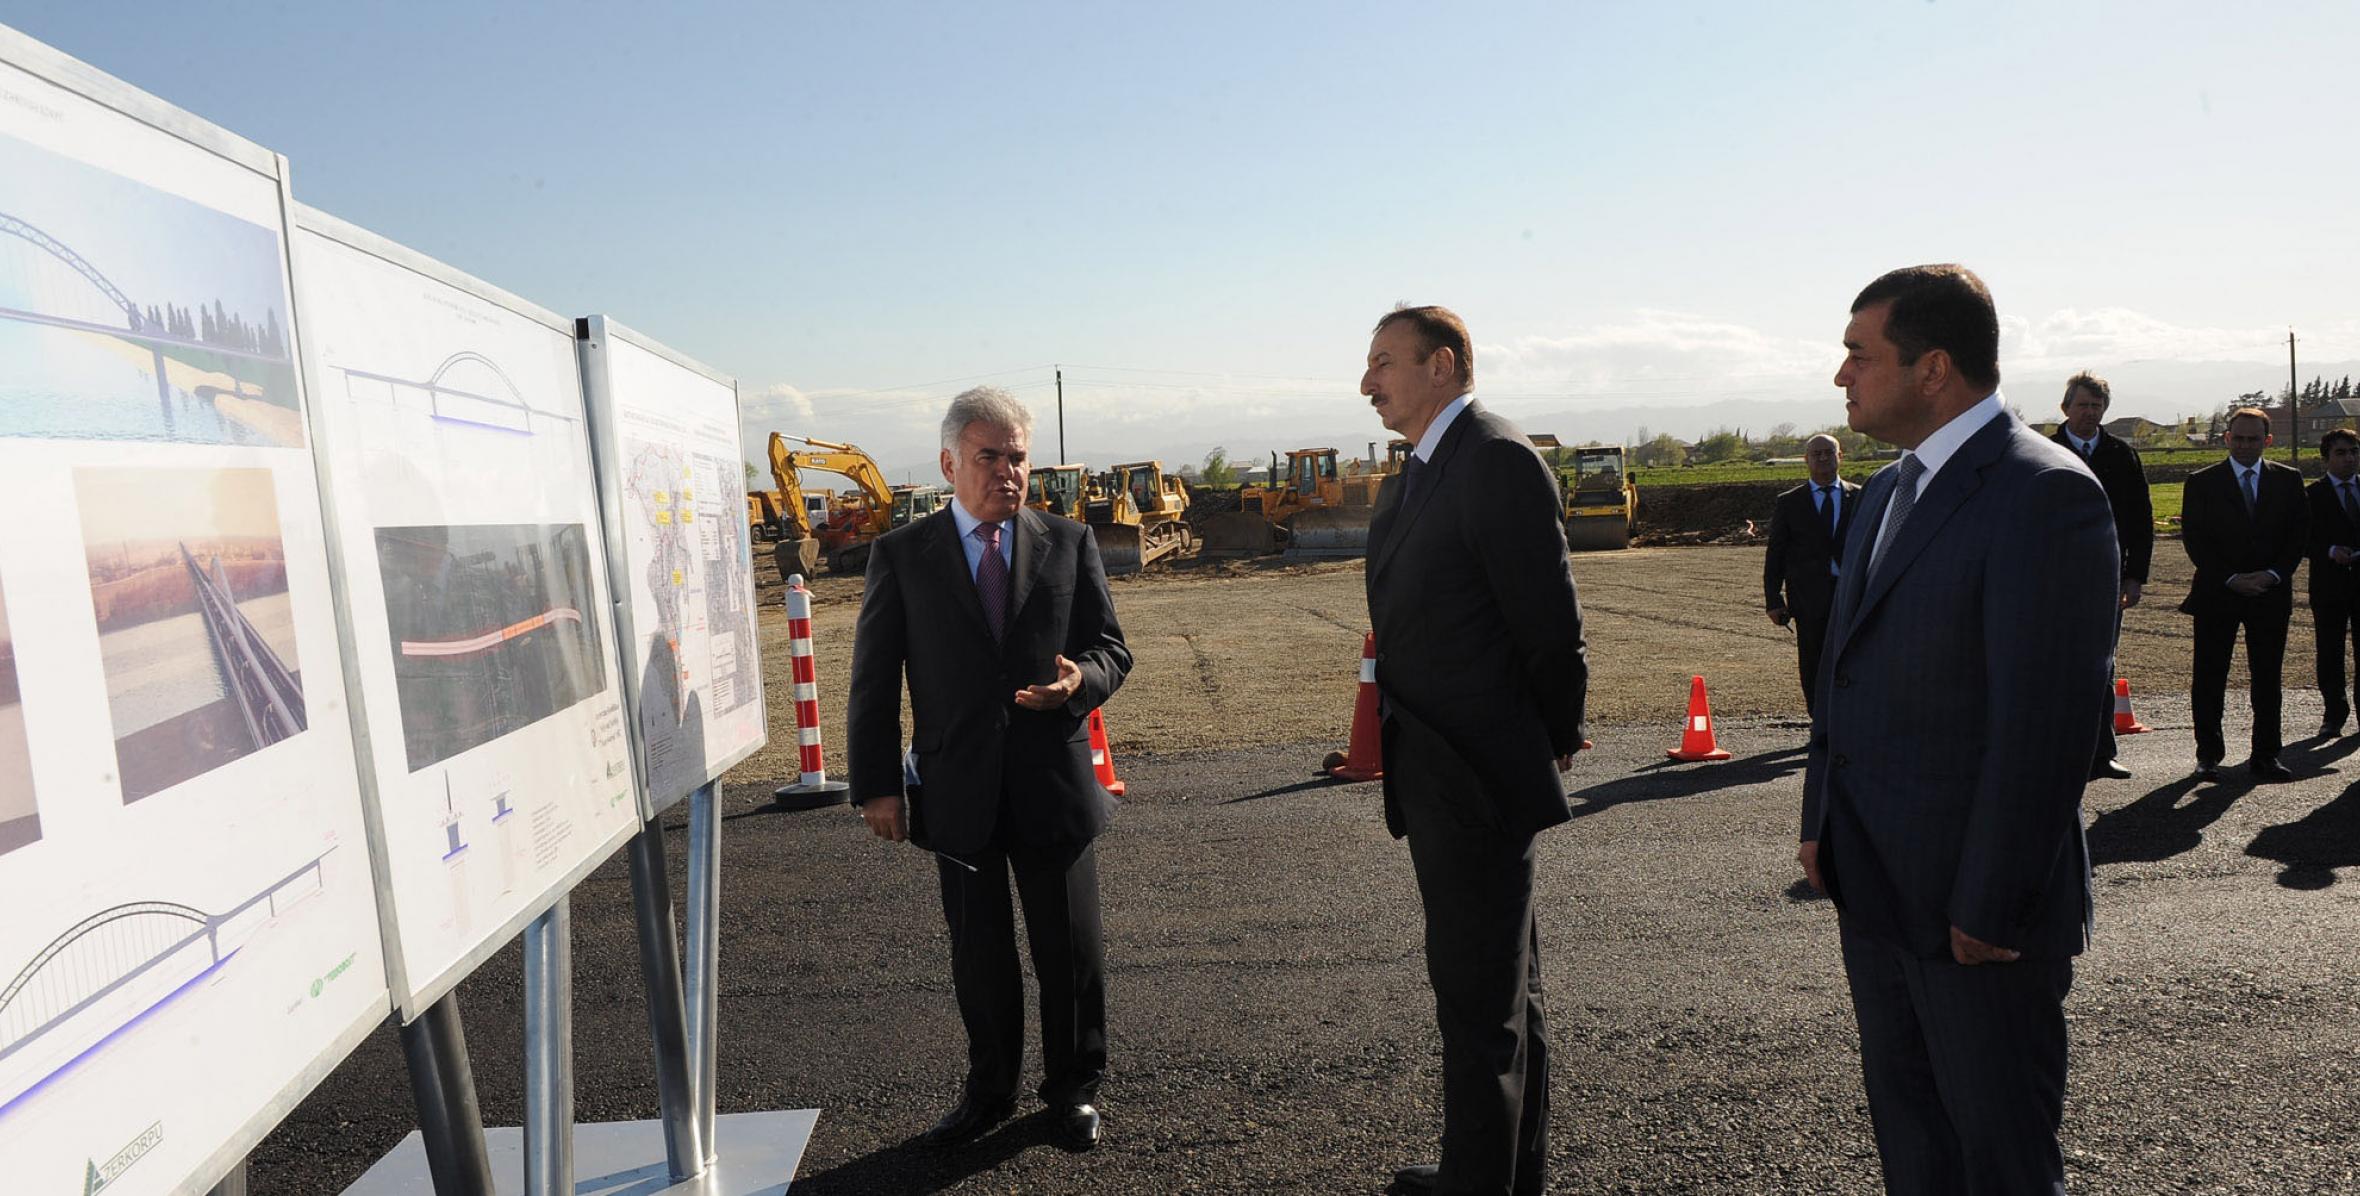 Ilham Aliyev checked out the construction works, carried out in Arkivan district